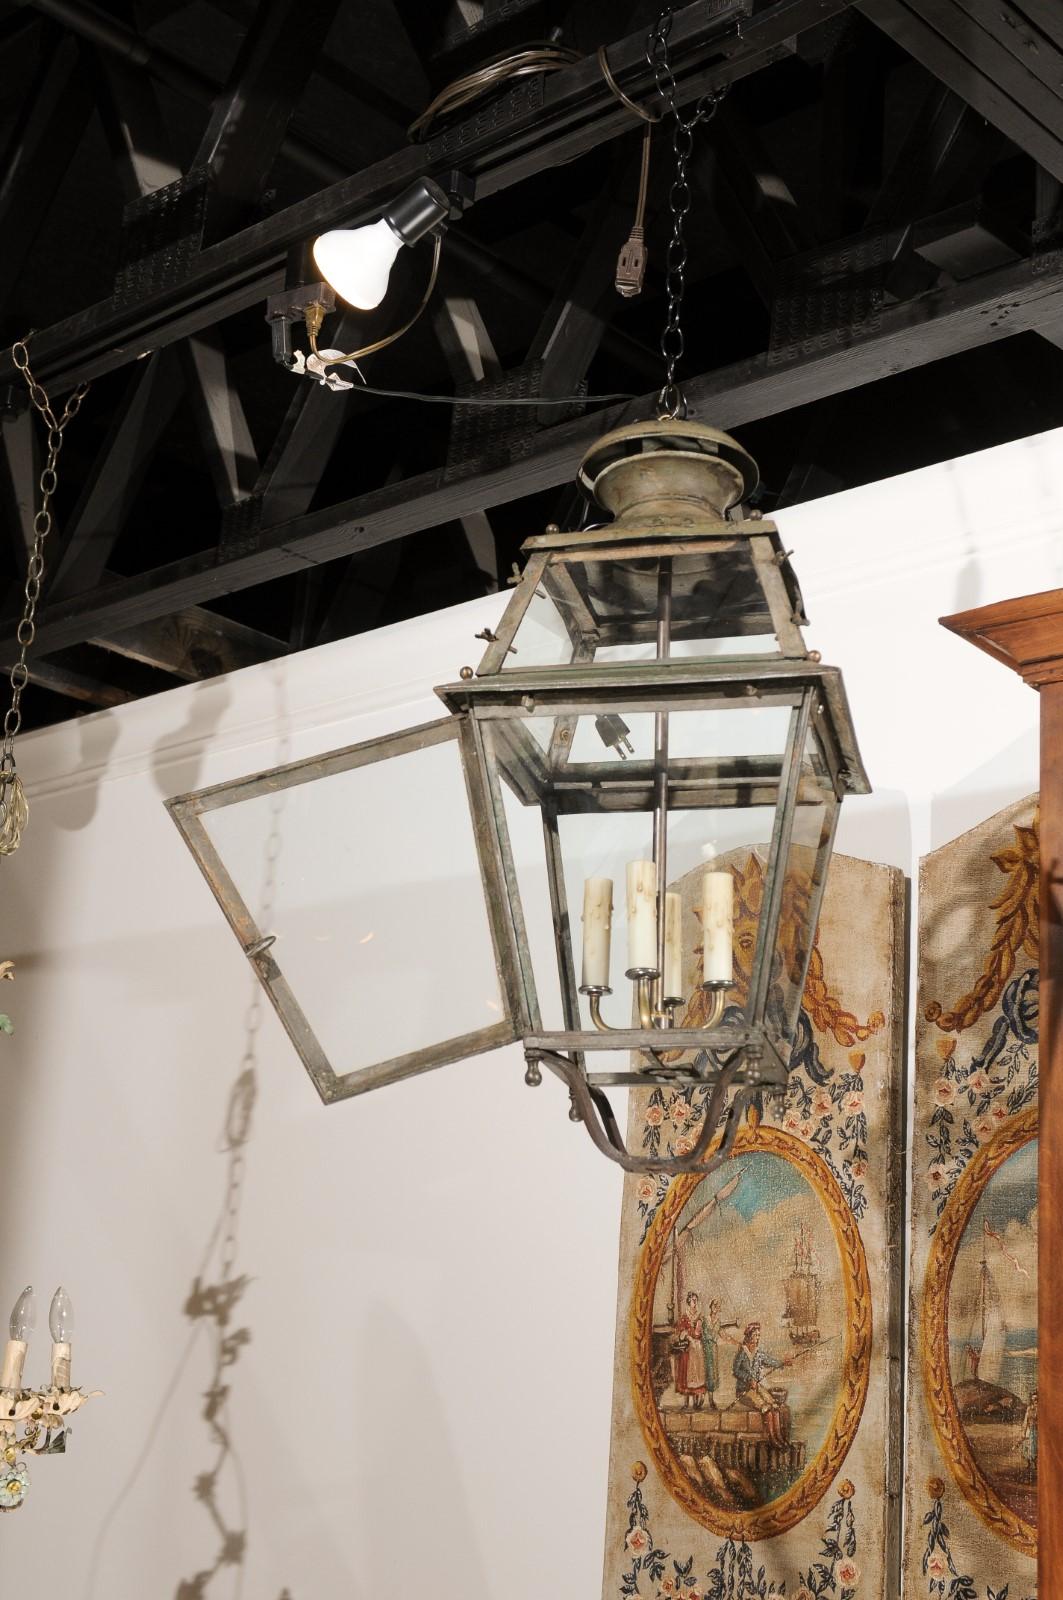 A French Napoléon III period tôle lantern from the mid 20th century, with four lights, original paint and glass panels. Created in France during the reign of Emperor Napoléon III, this tôle lantern features tapering glass panels securing four lights